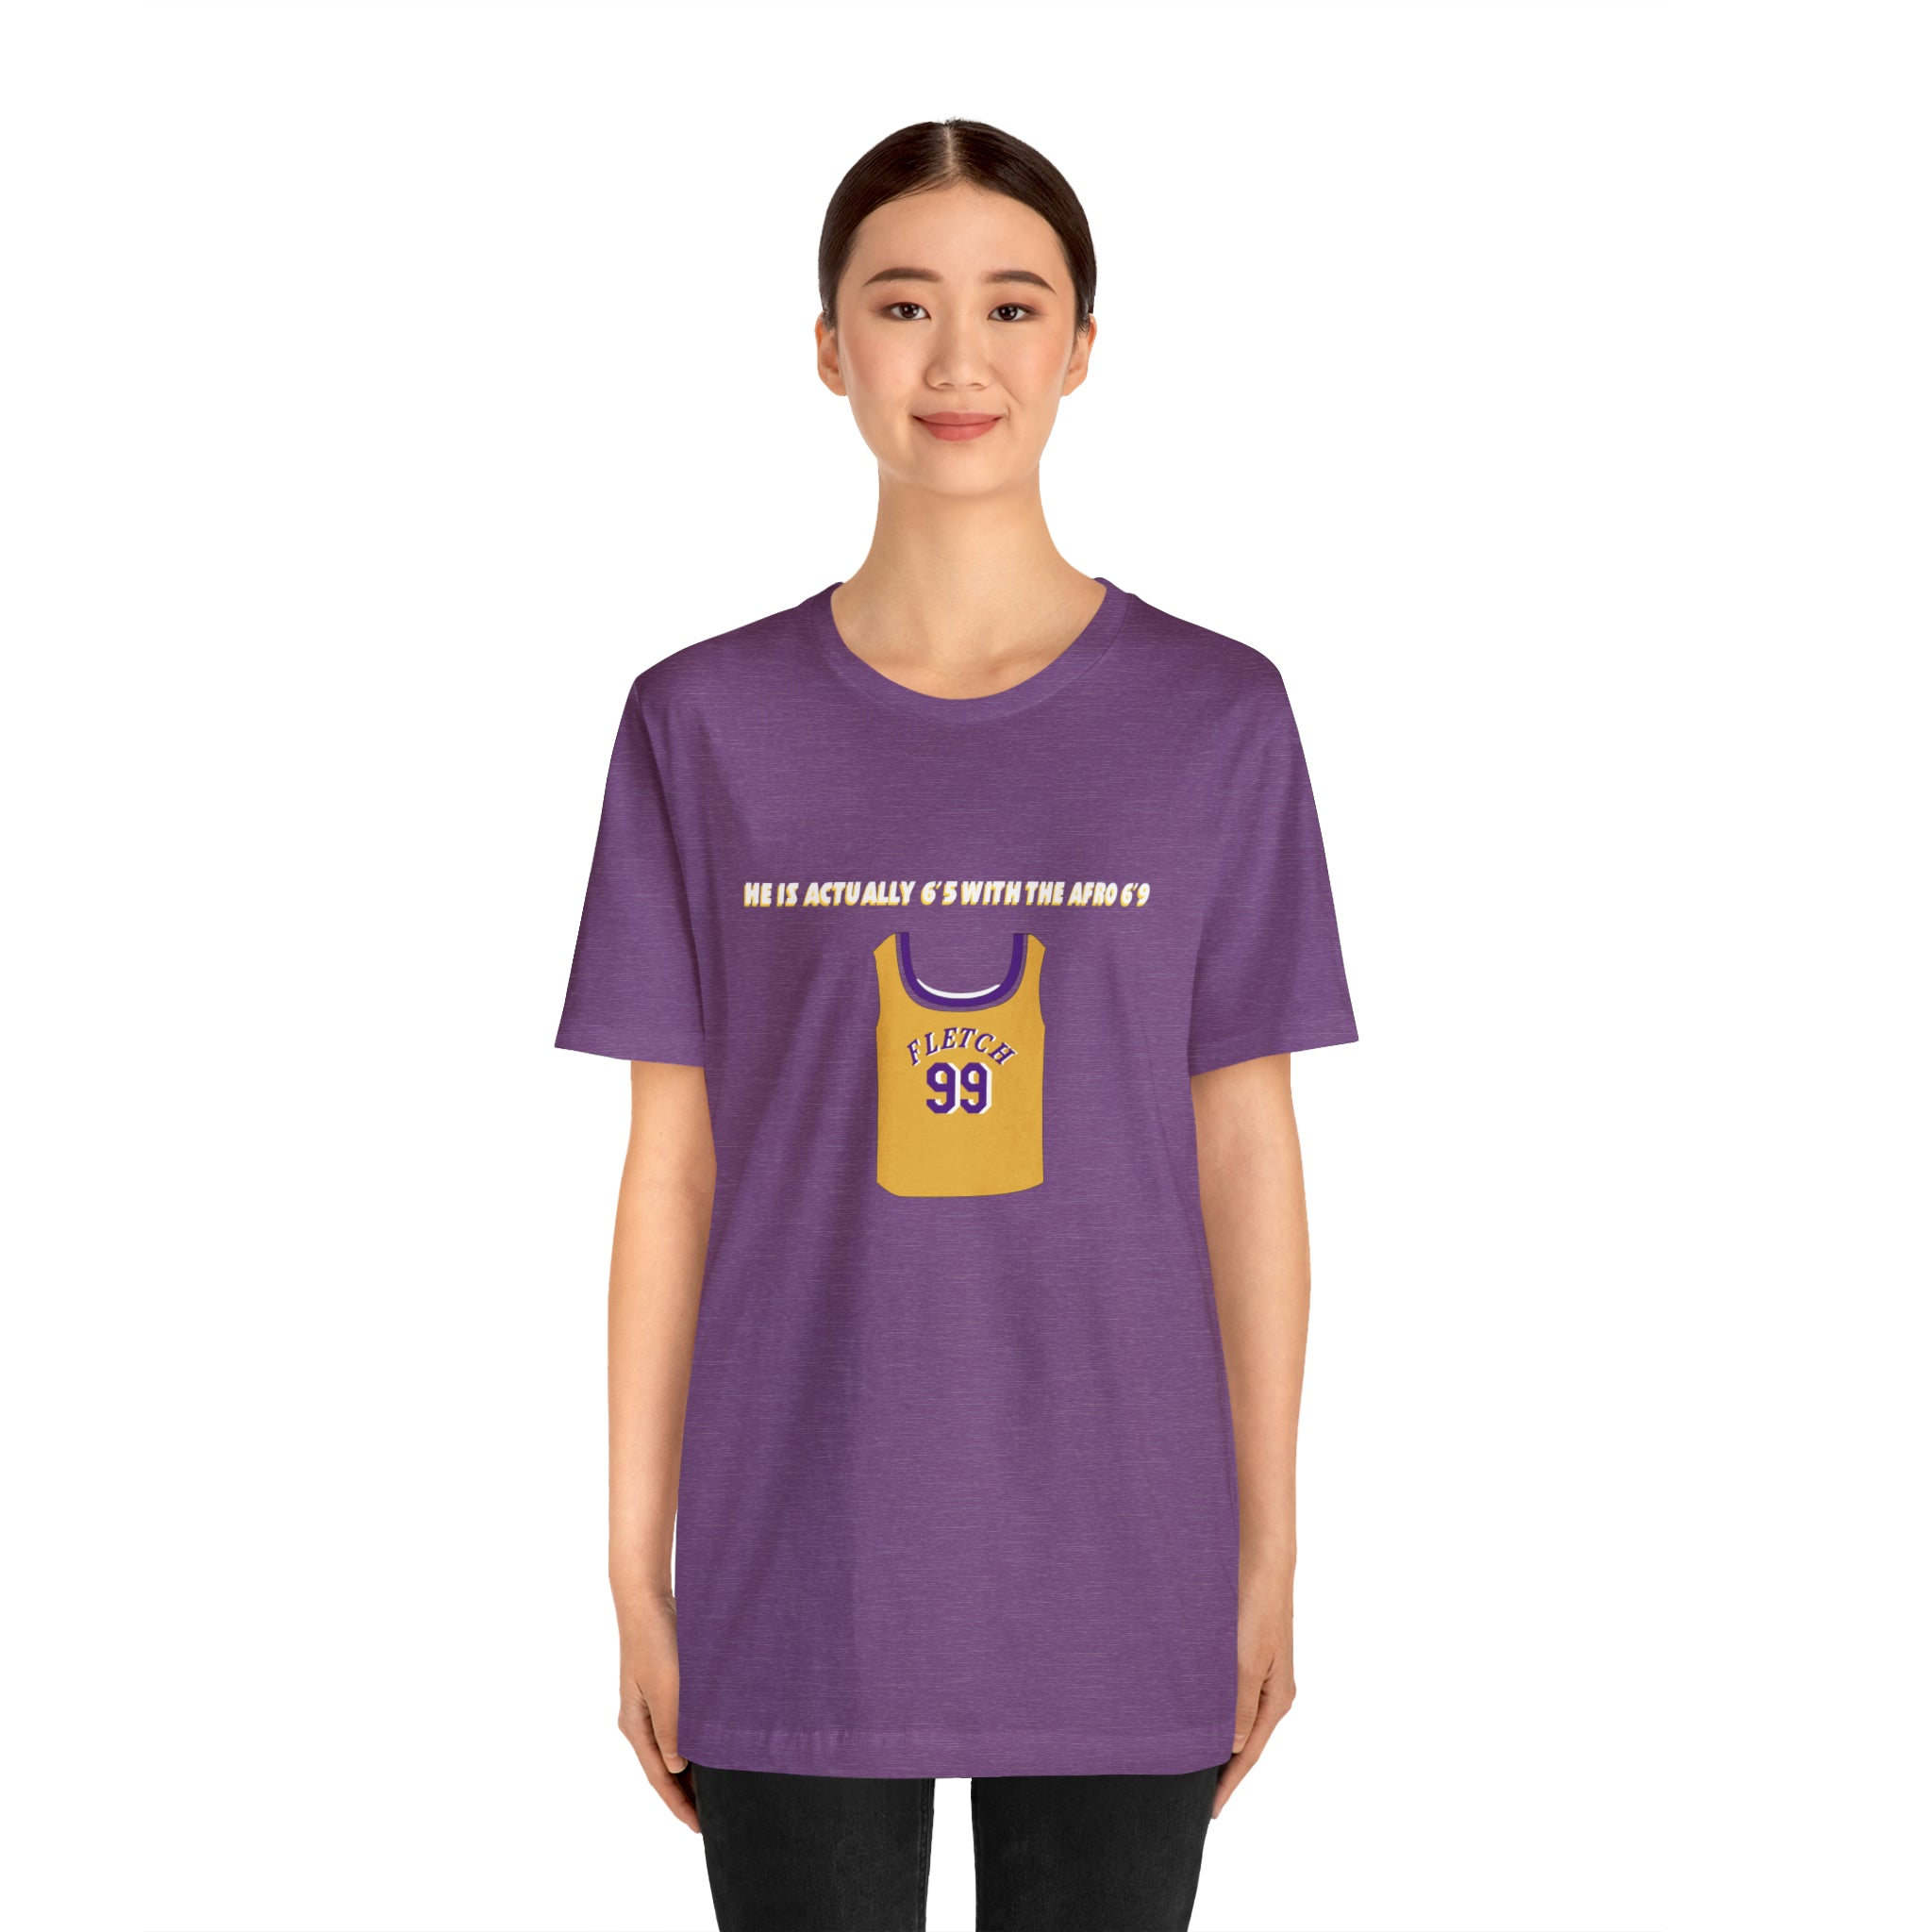 Fletch: Los Angeles Lakers – T-Shirts On Screen